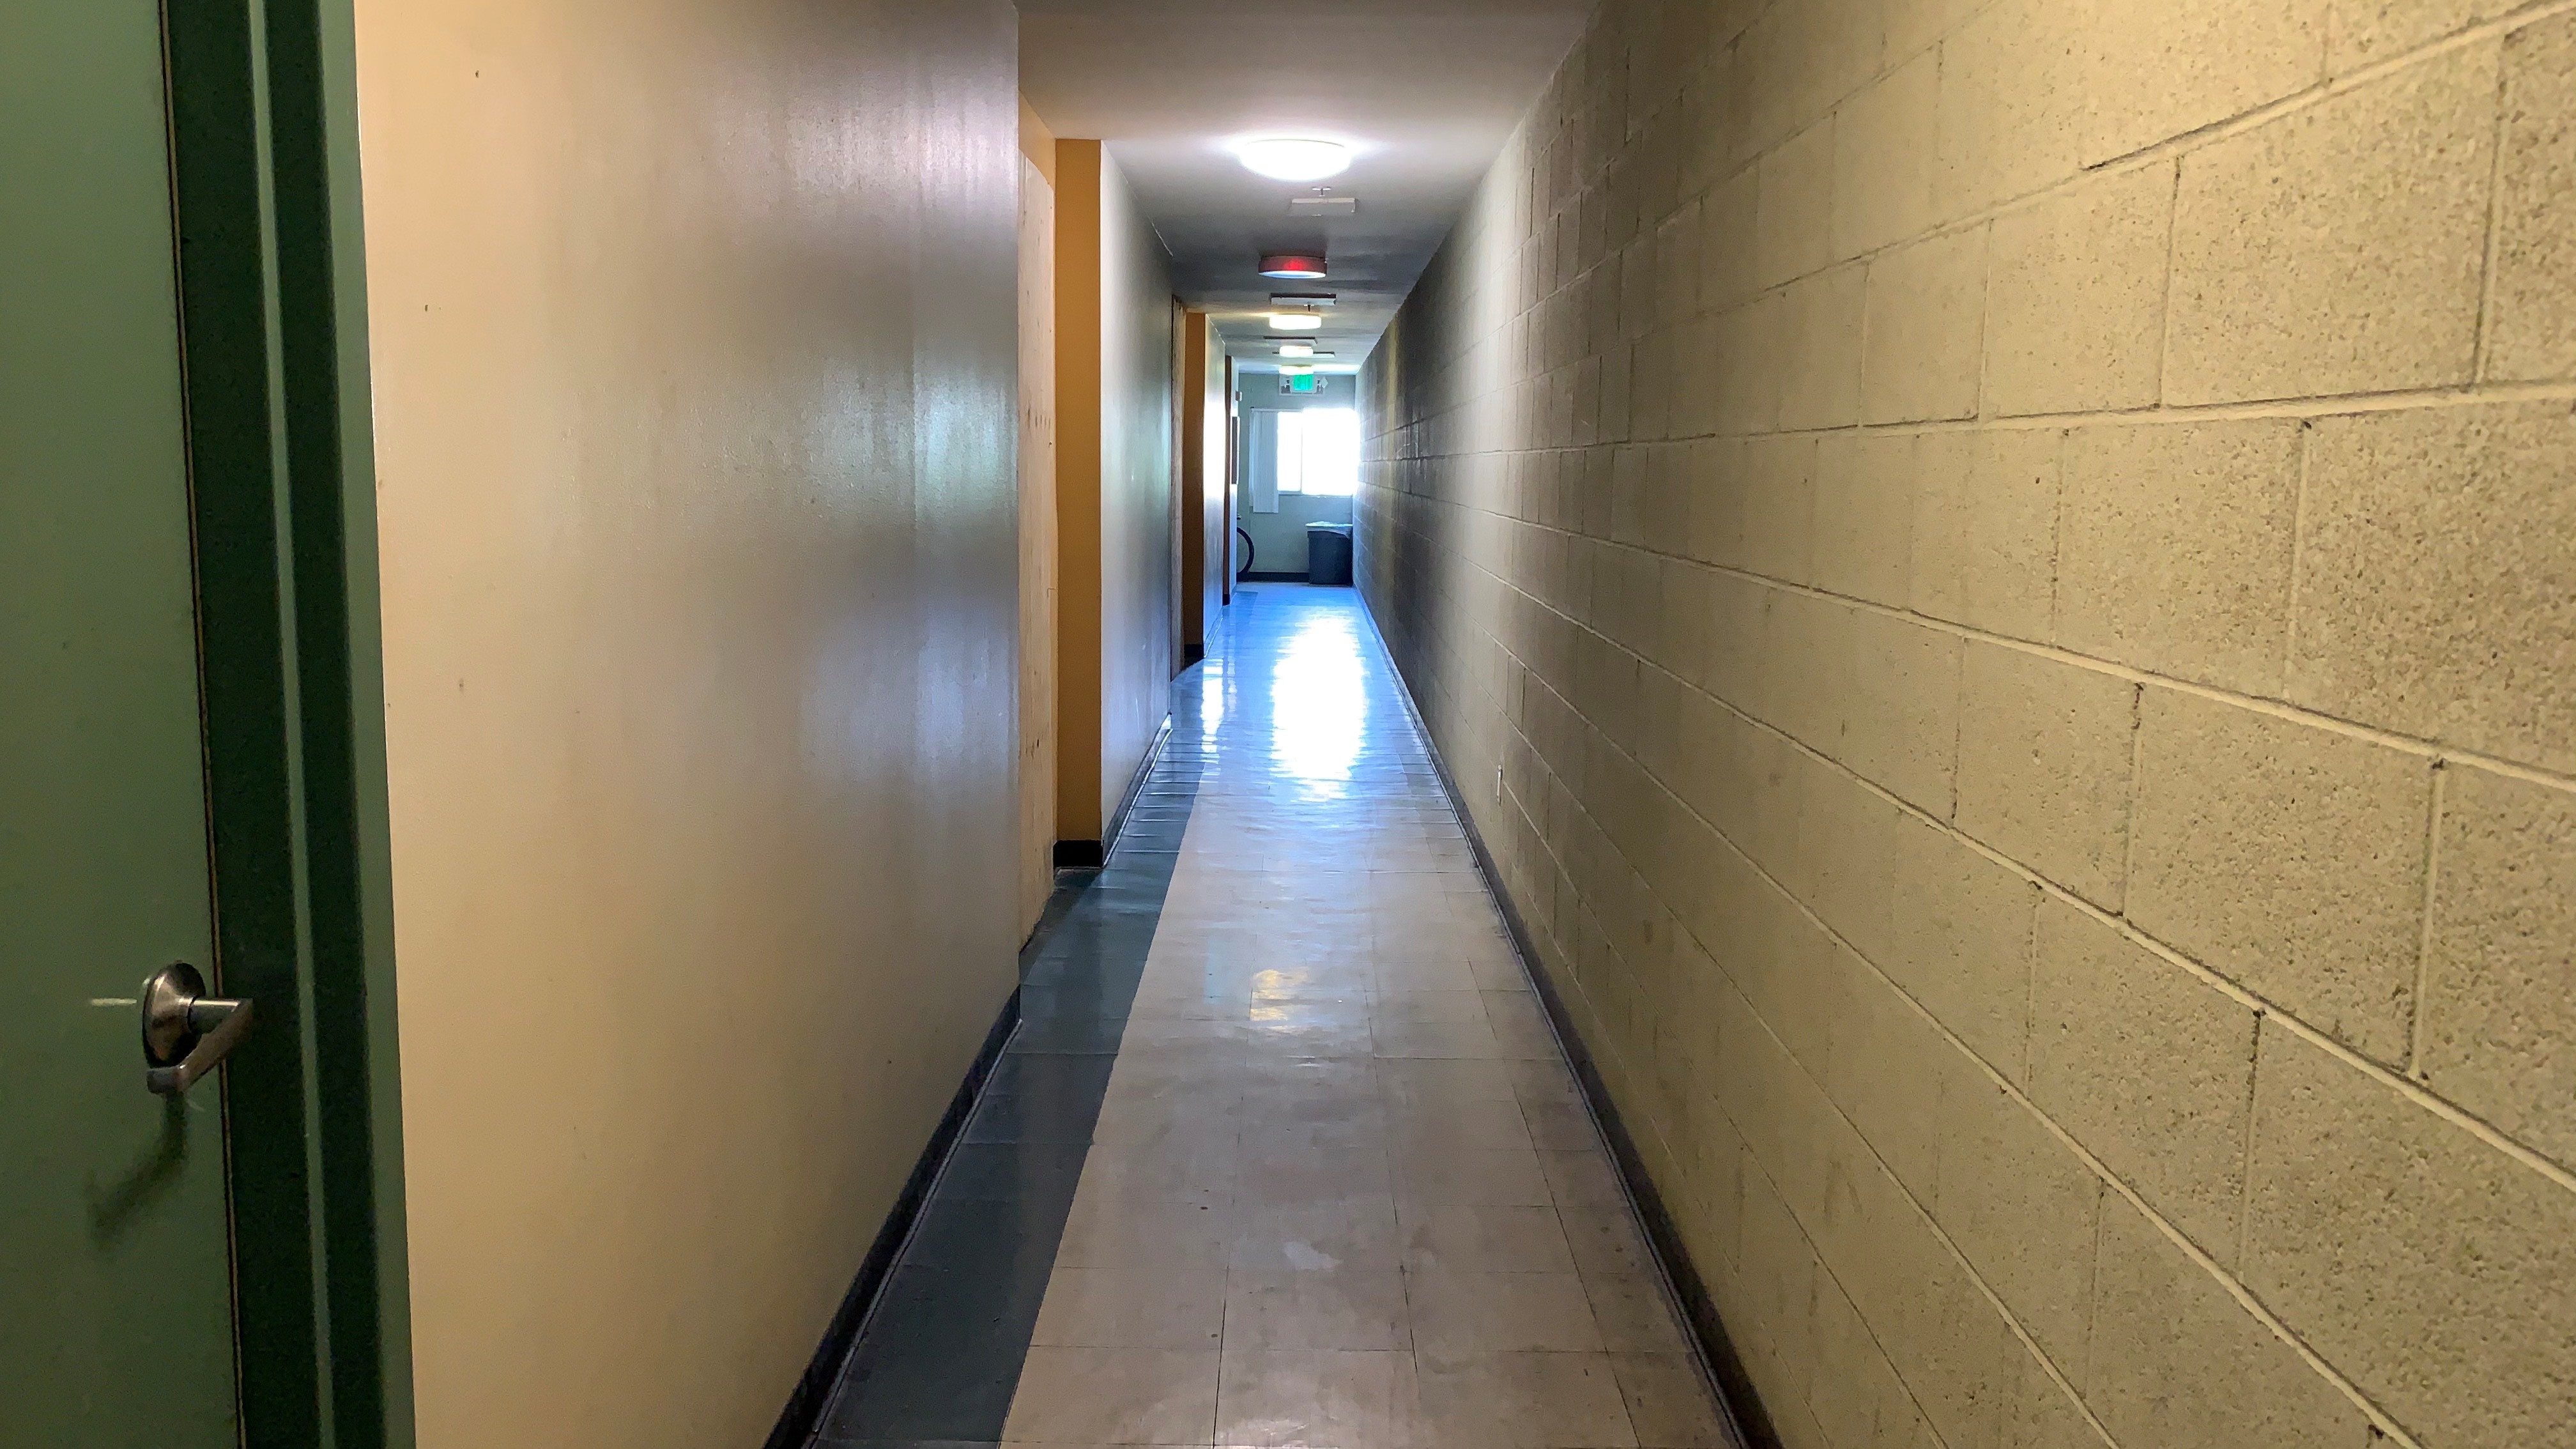 View of a long narrow hallway.